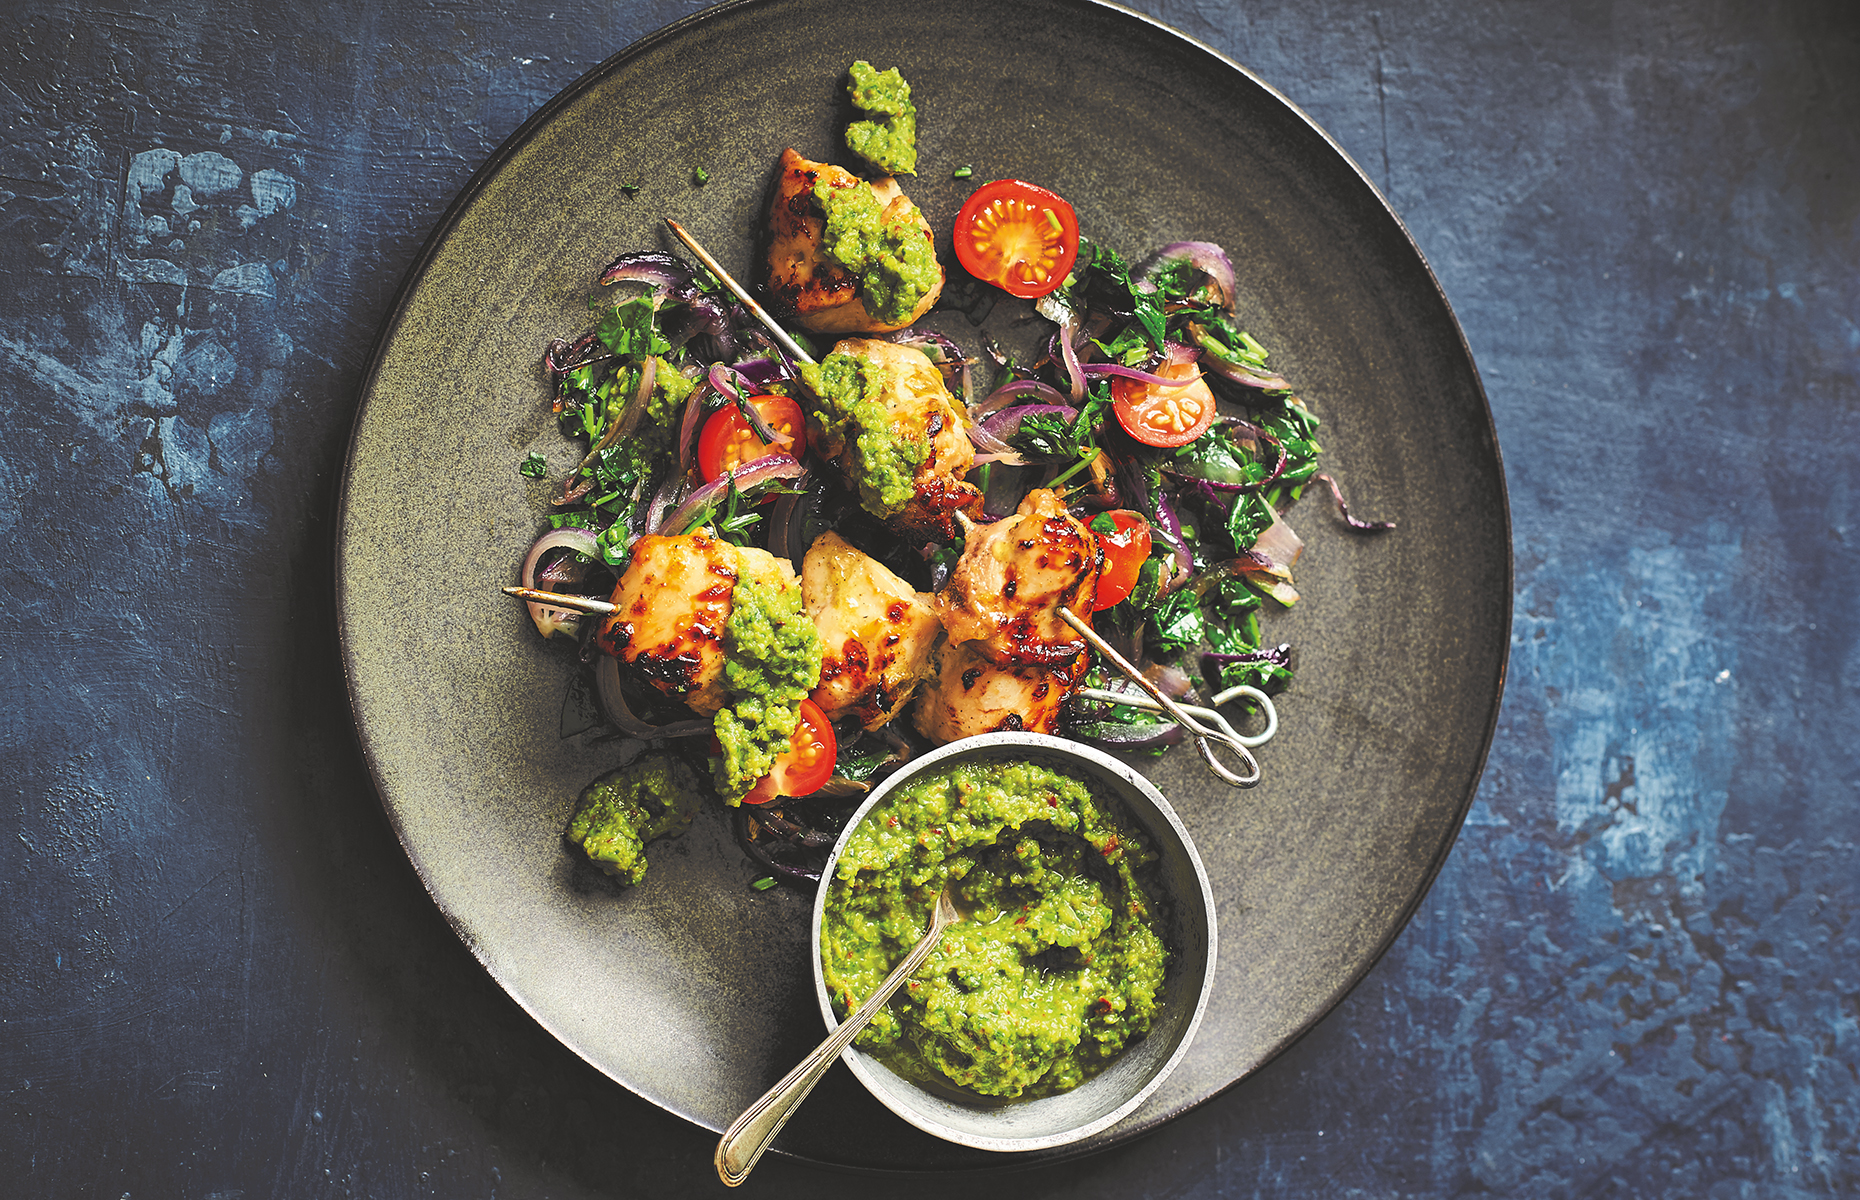 Chicken skewers with apple and pea chutney (Image: The Doctor's Kitchen/Harper Thorsons)